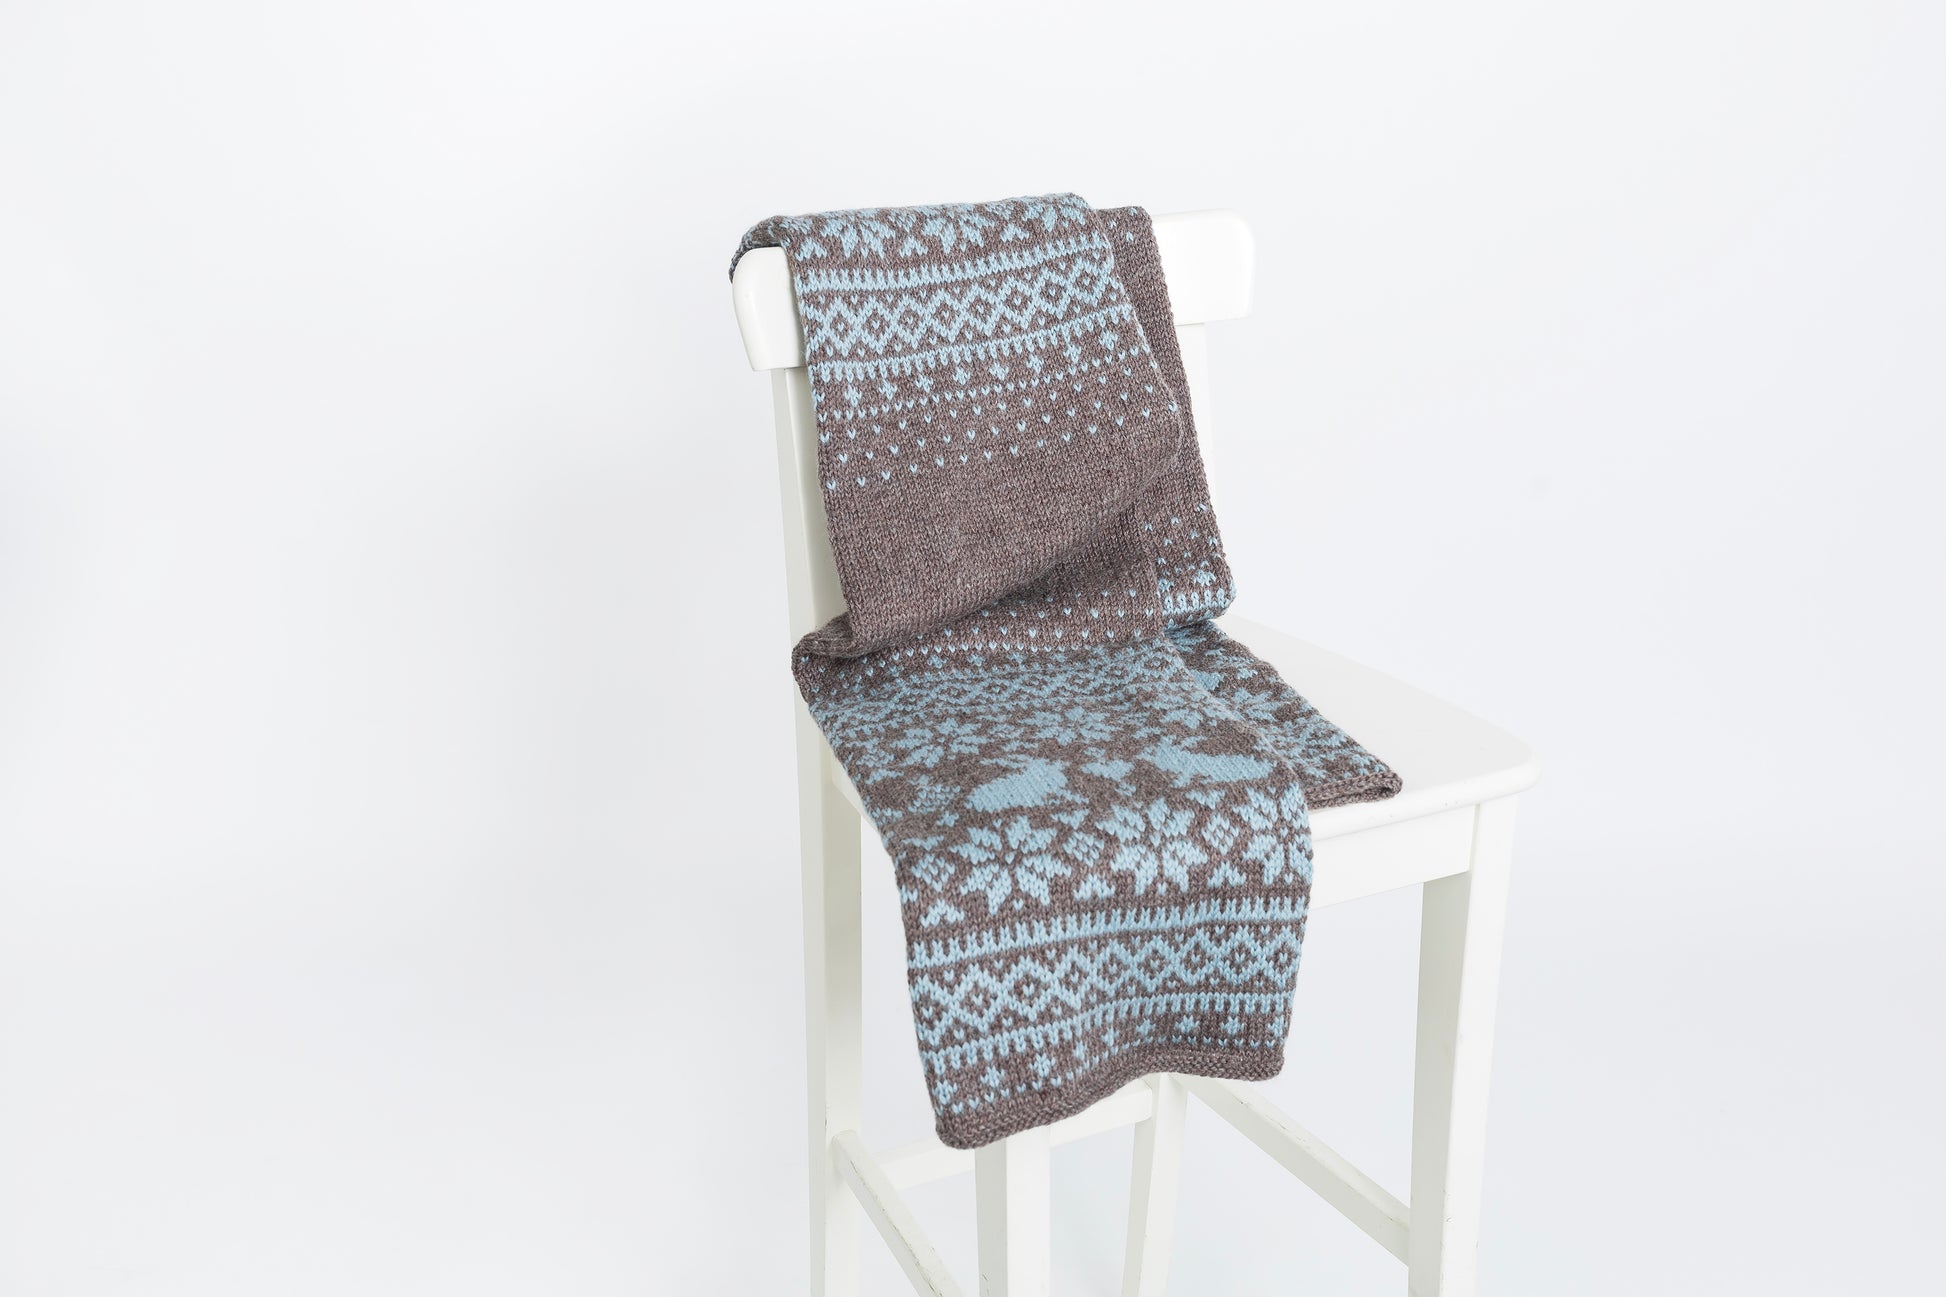 Brown and grey blue wool hand-knitted long Fair Isle scarf in Bunny Rabbit pattern on a chair